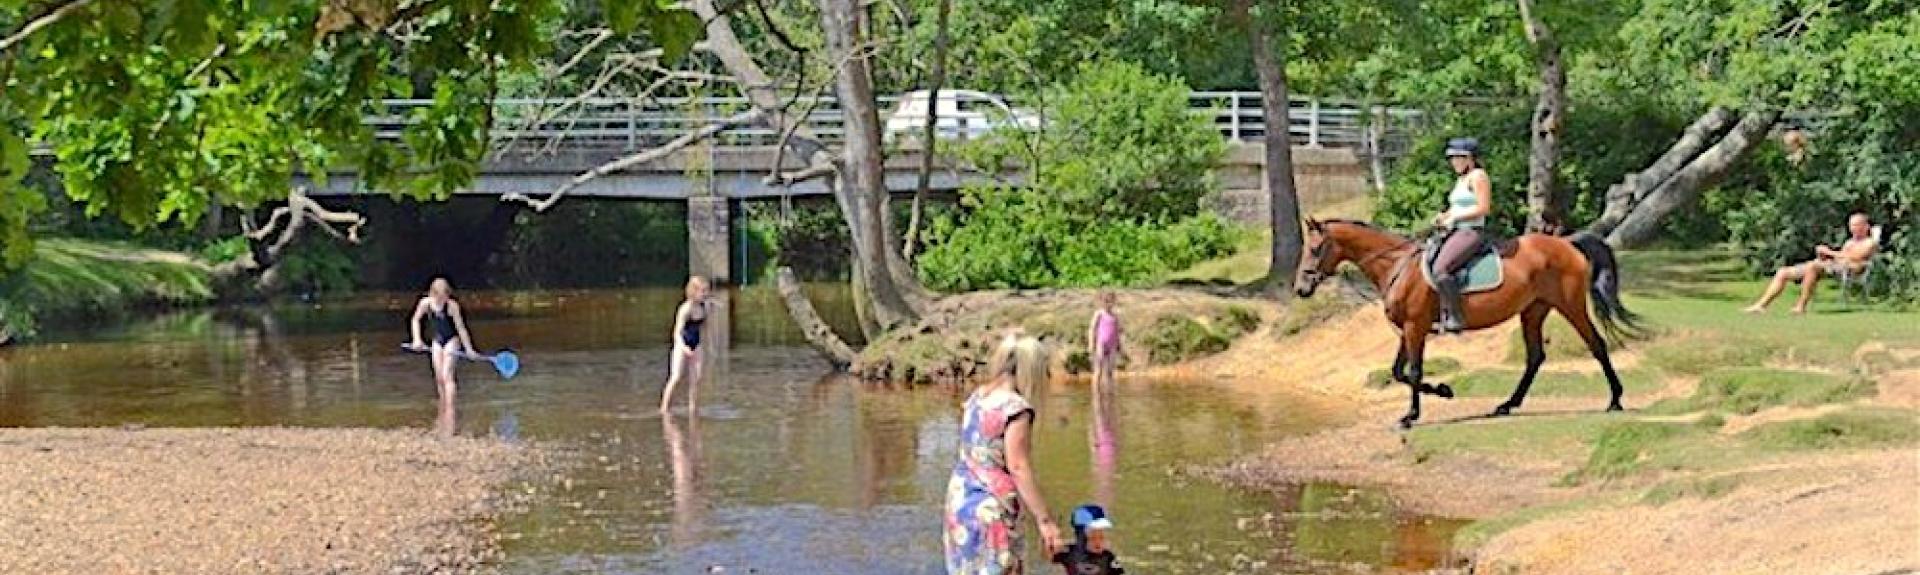 People paddle by a bridge in a New Forest stream as a rider on a horse crosses it.